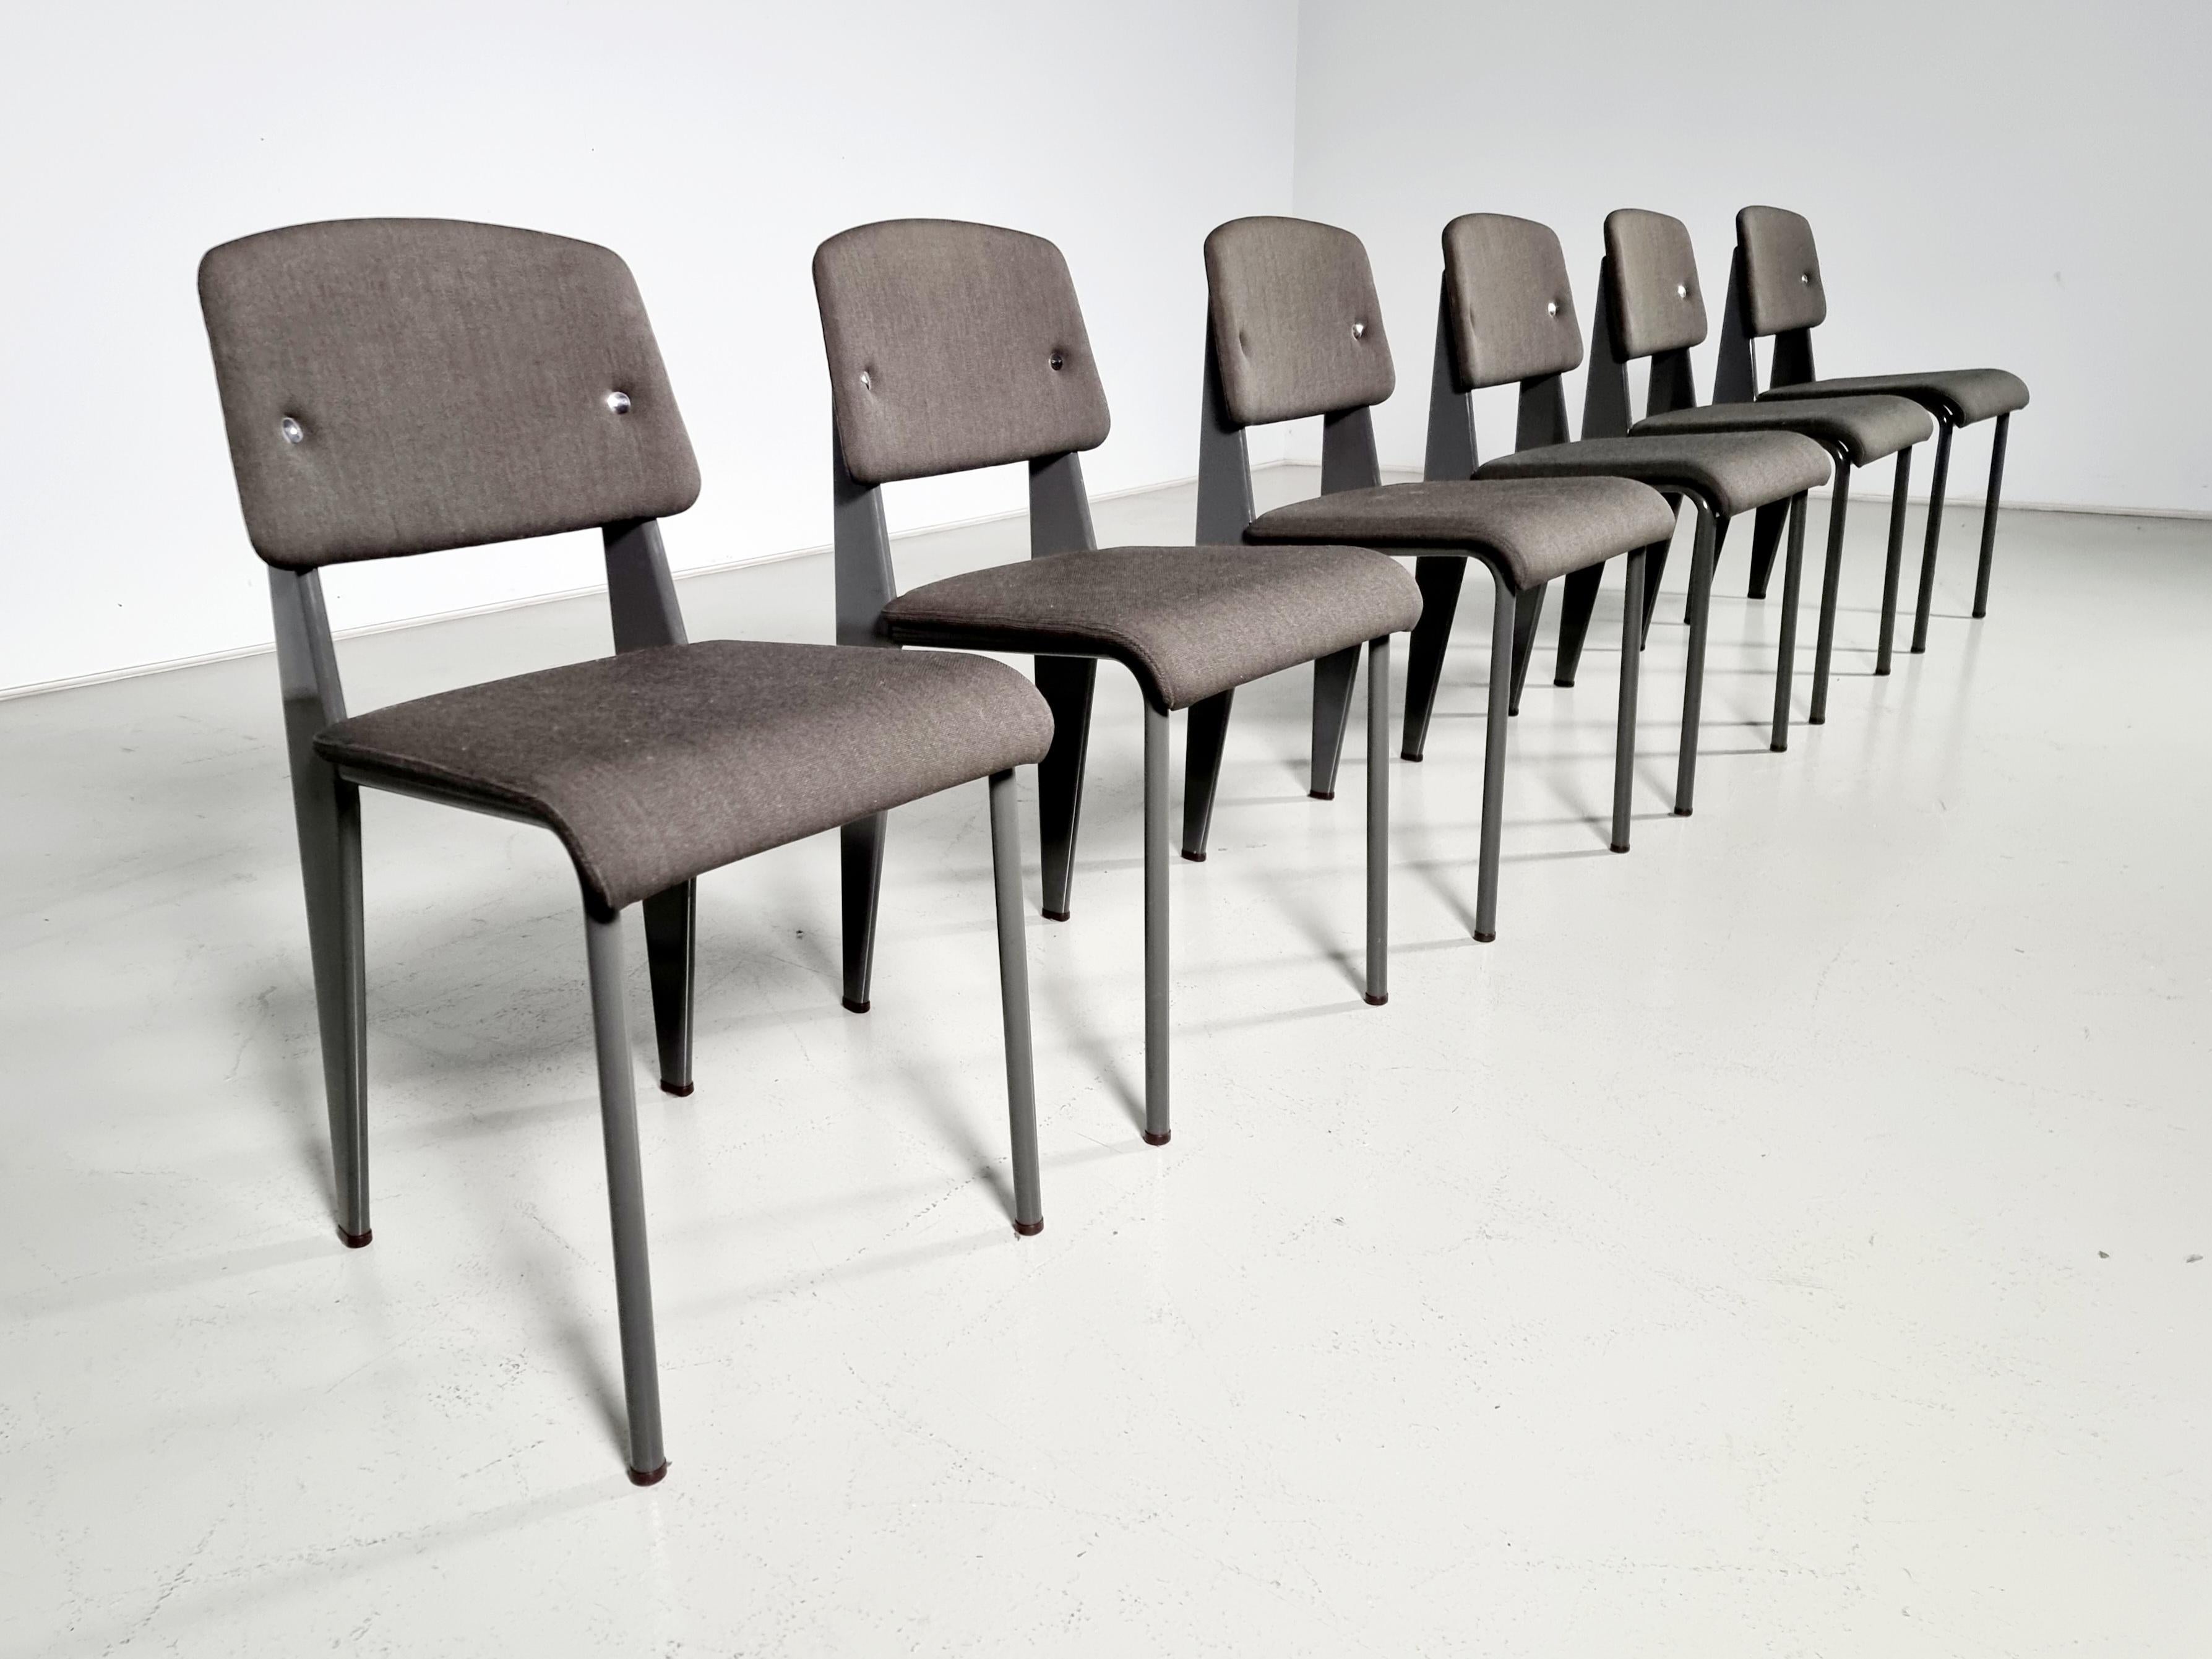 Jean Prouve by G-Star Raw for Vitra S.A.M. Tropique Table with matching chairs For Sale 9